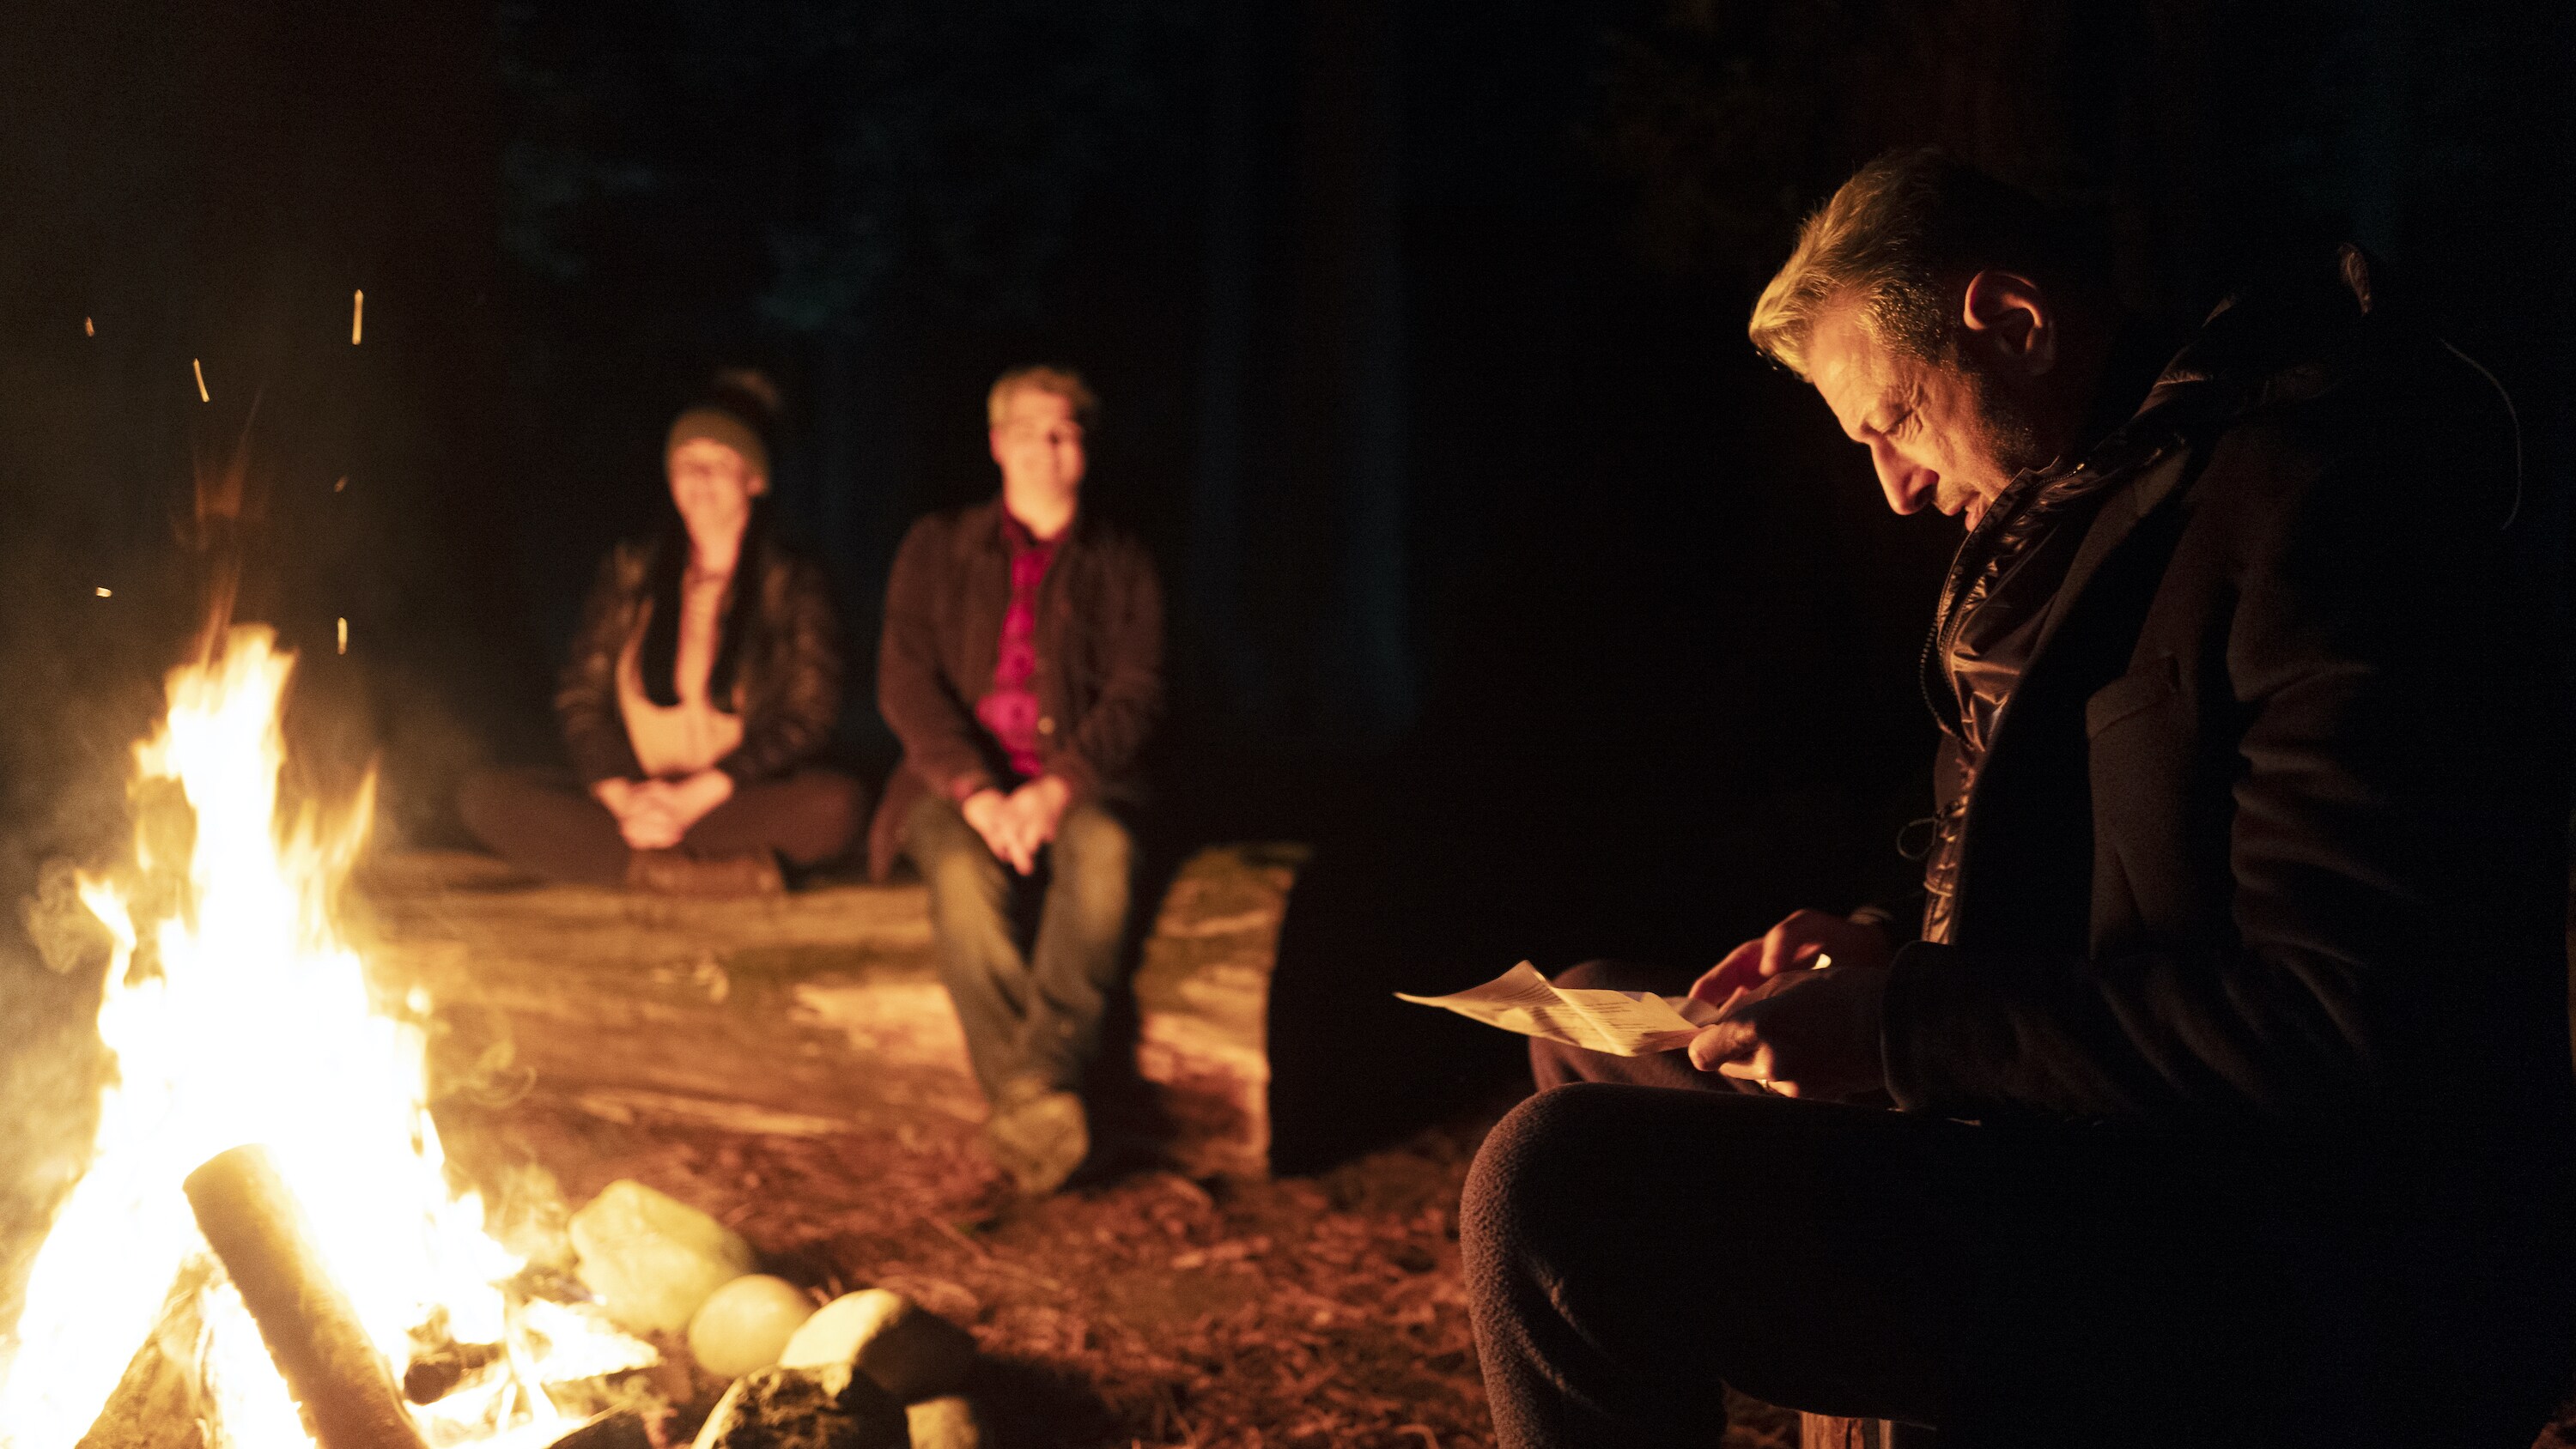 Eureka, CA - Jeff Goldblum (R) around the camp fire in Eureka Forest after hunting for Big Foot with cryptozoologists Dana Newkirk (L) and Greg Newkirk (center). (Credit: National Geographic/Seppi Aghajani)